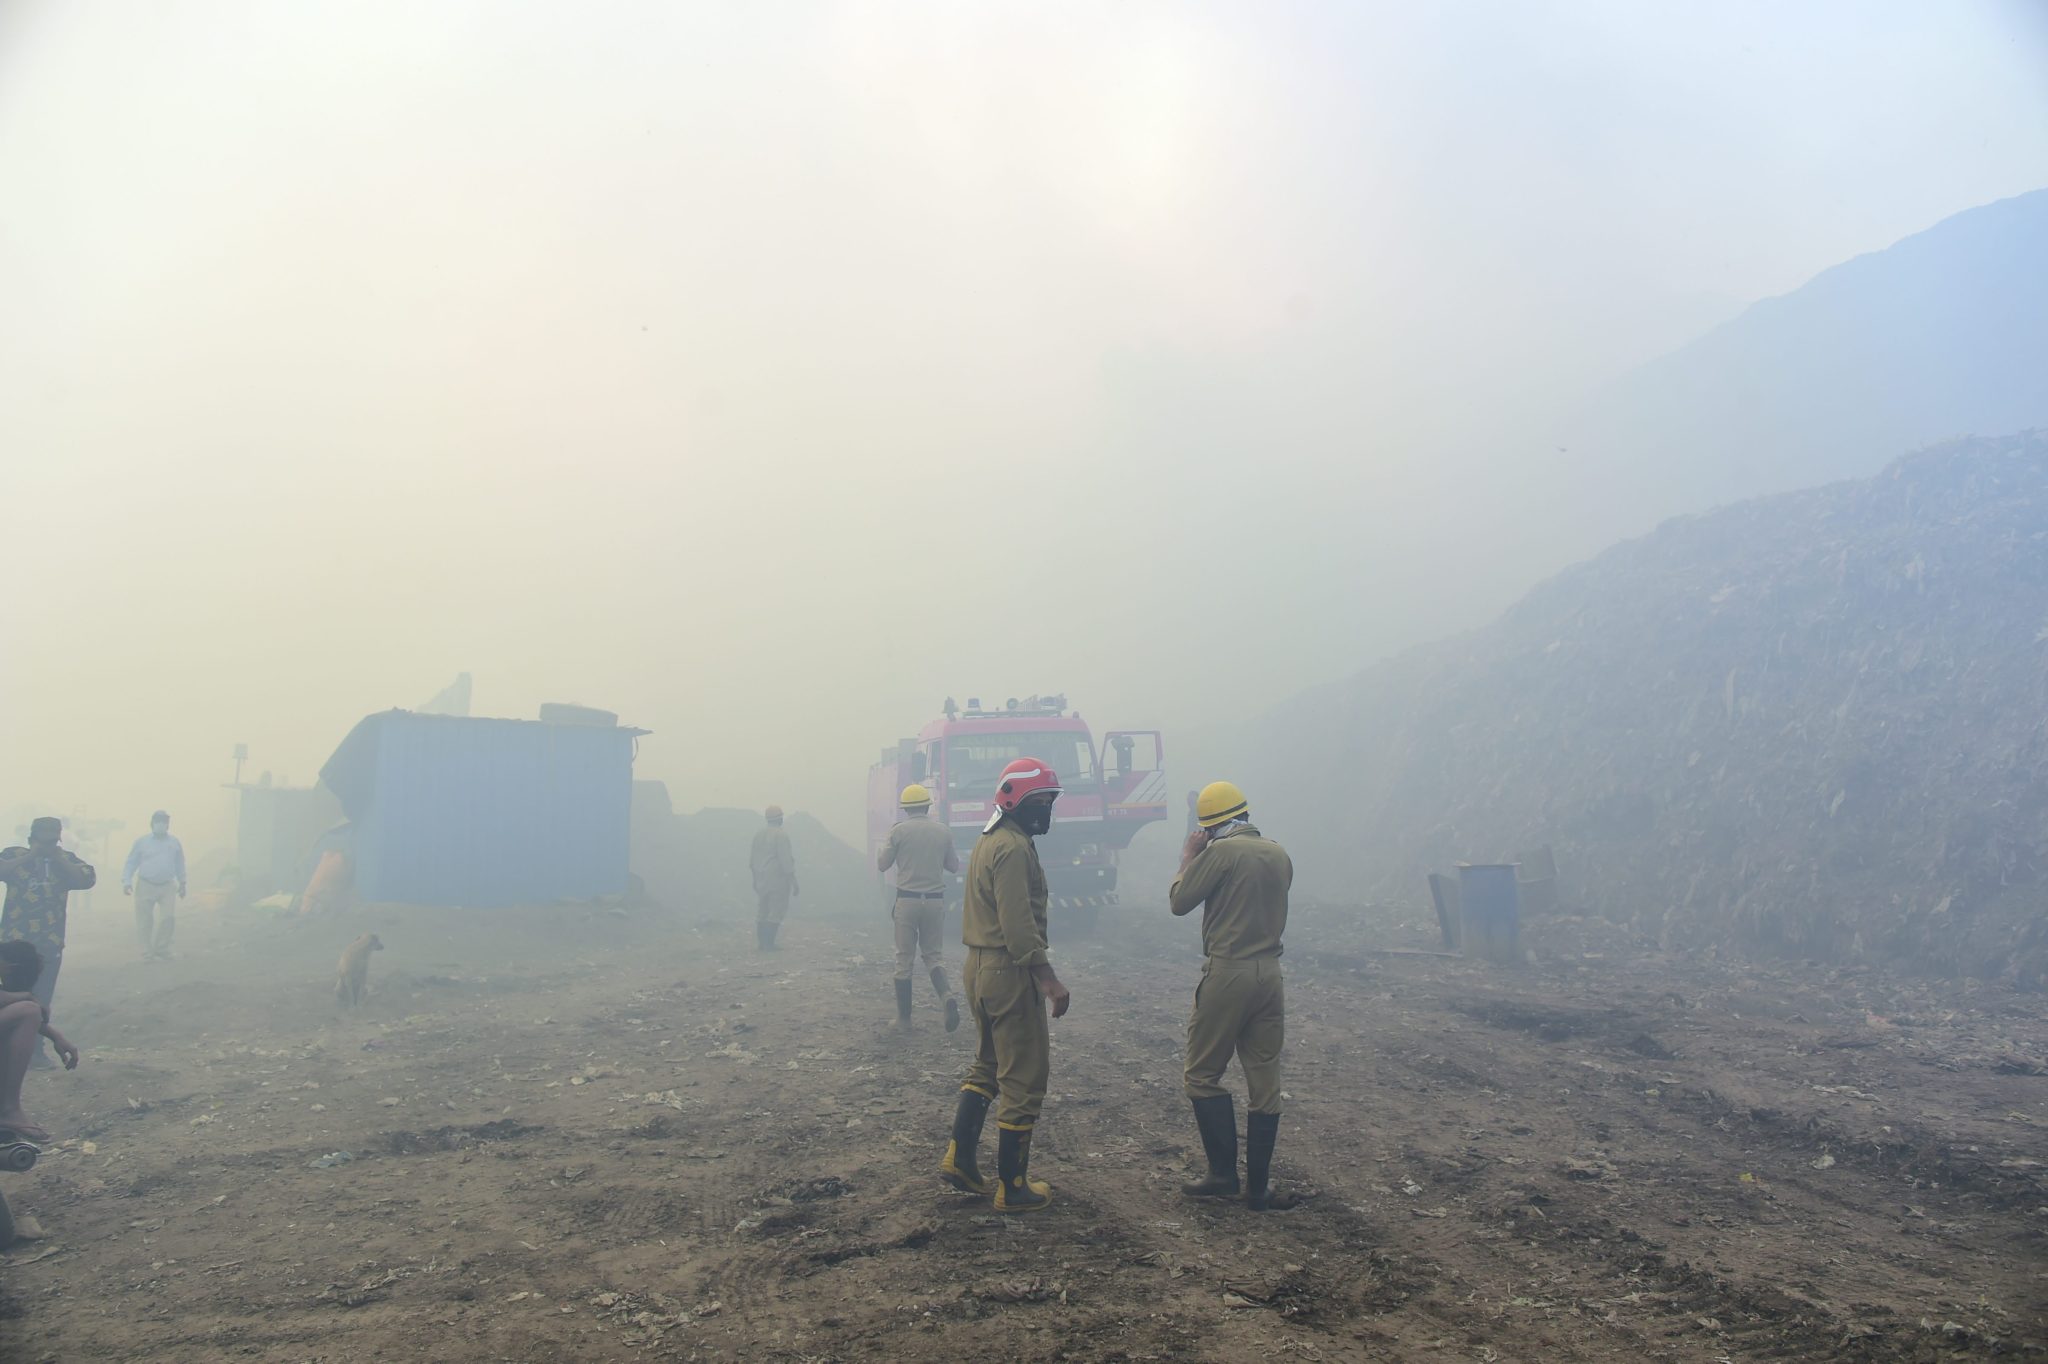 Firefighters try to extinguish a fire that broke out at the Ghazipur landfill in New Delhi on 28 March 2022. Photo: Ravi Choudhary / PTI